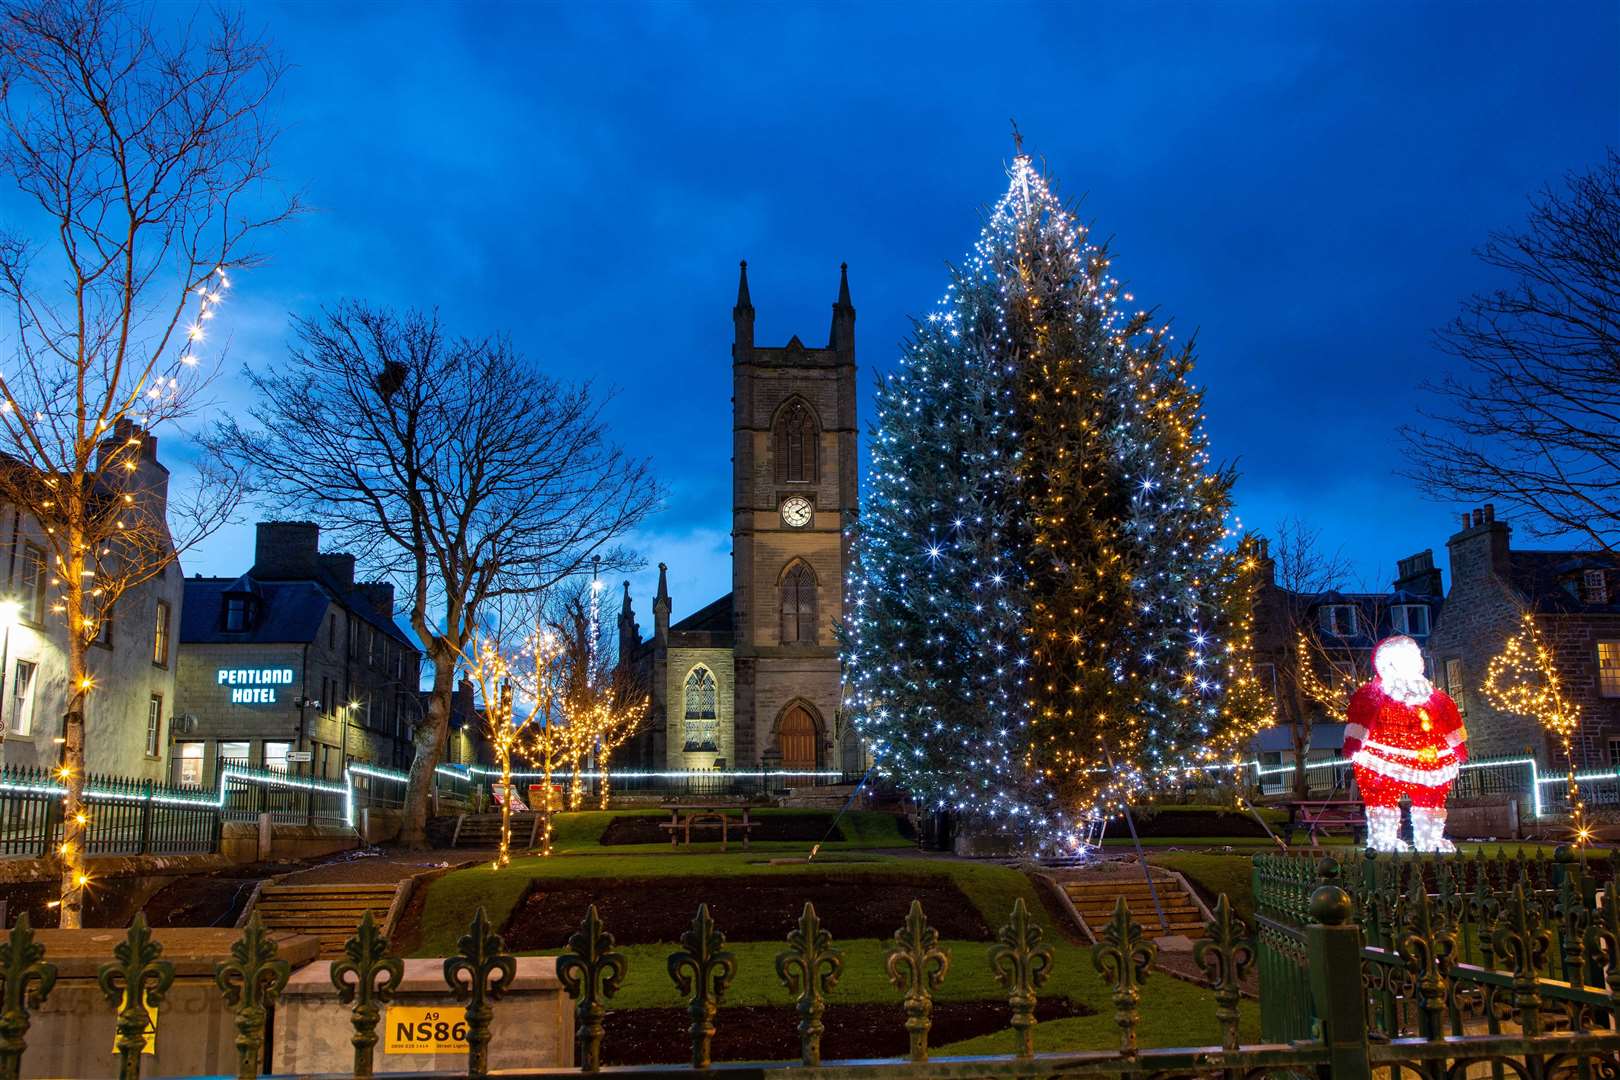 A closer view of the Christmas decorations in Sir John's Square which includes some new lights this year. Picture: Grant Coghill